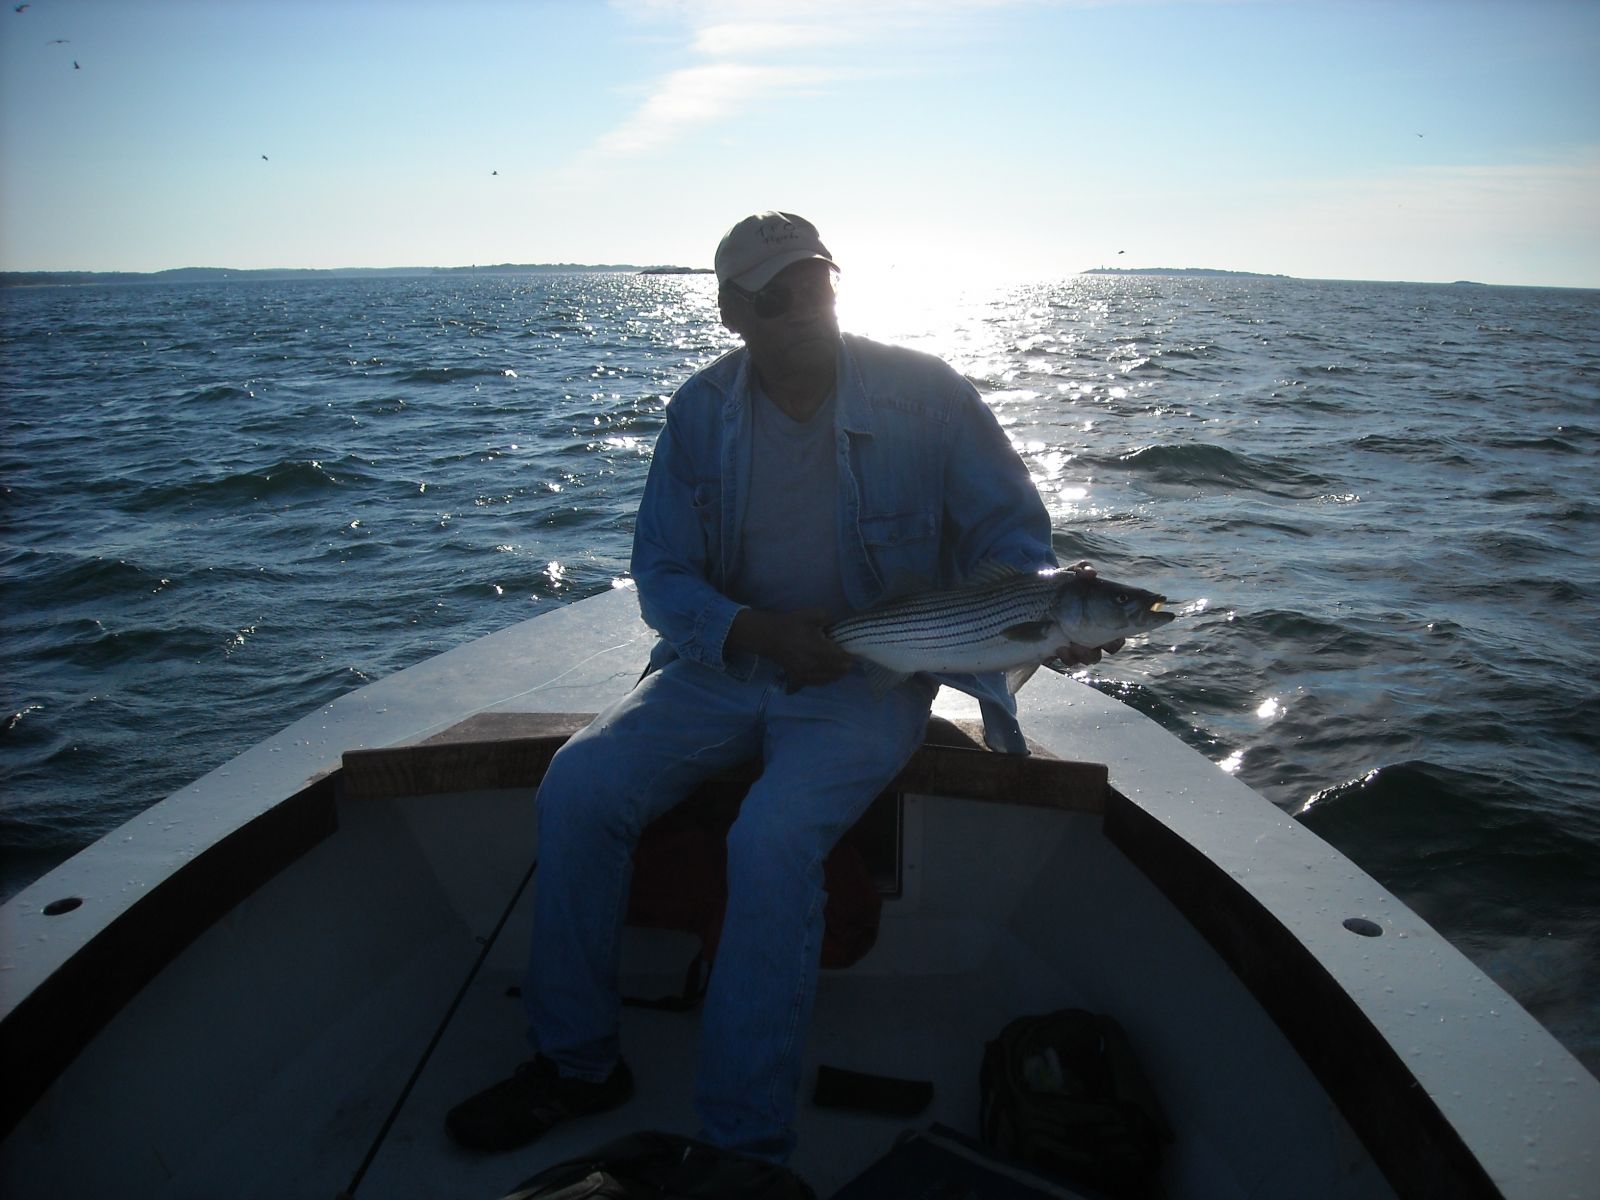 FS17 and Fish Mojo!
First fish on the boat. Small 23" striper
Keywords: first fish